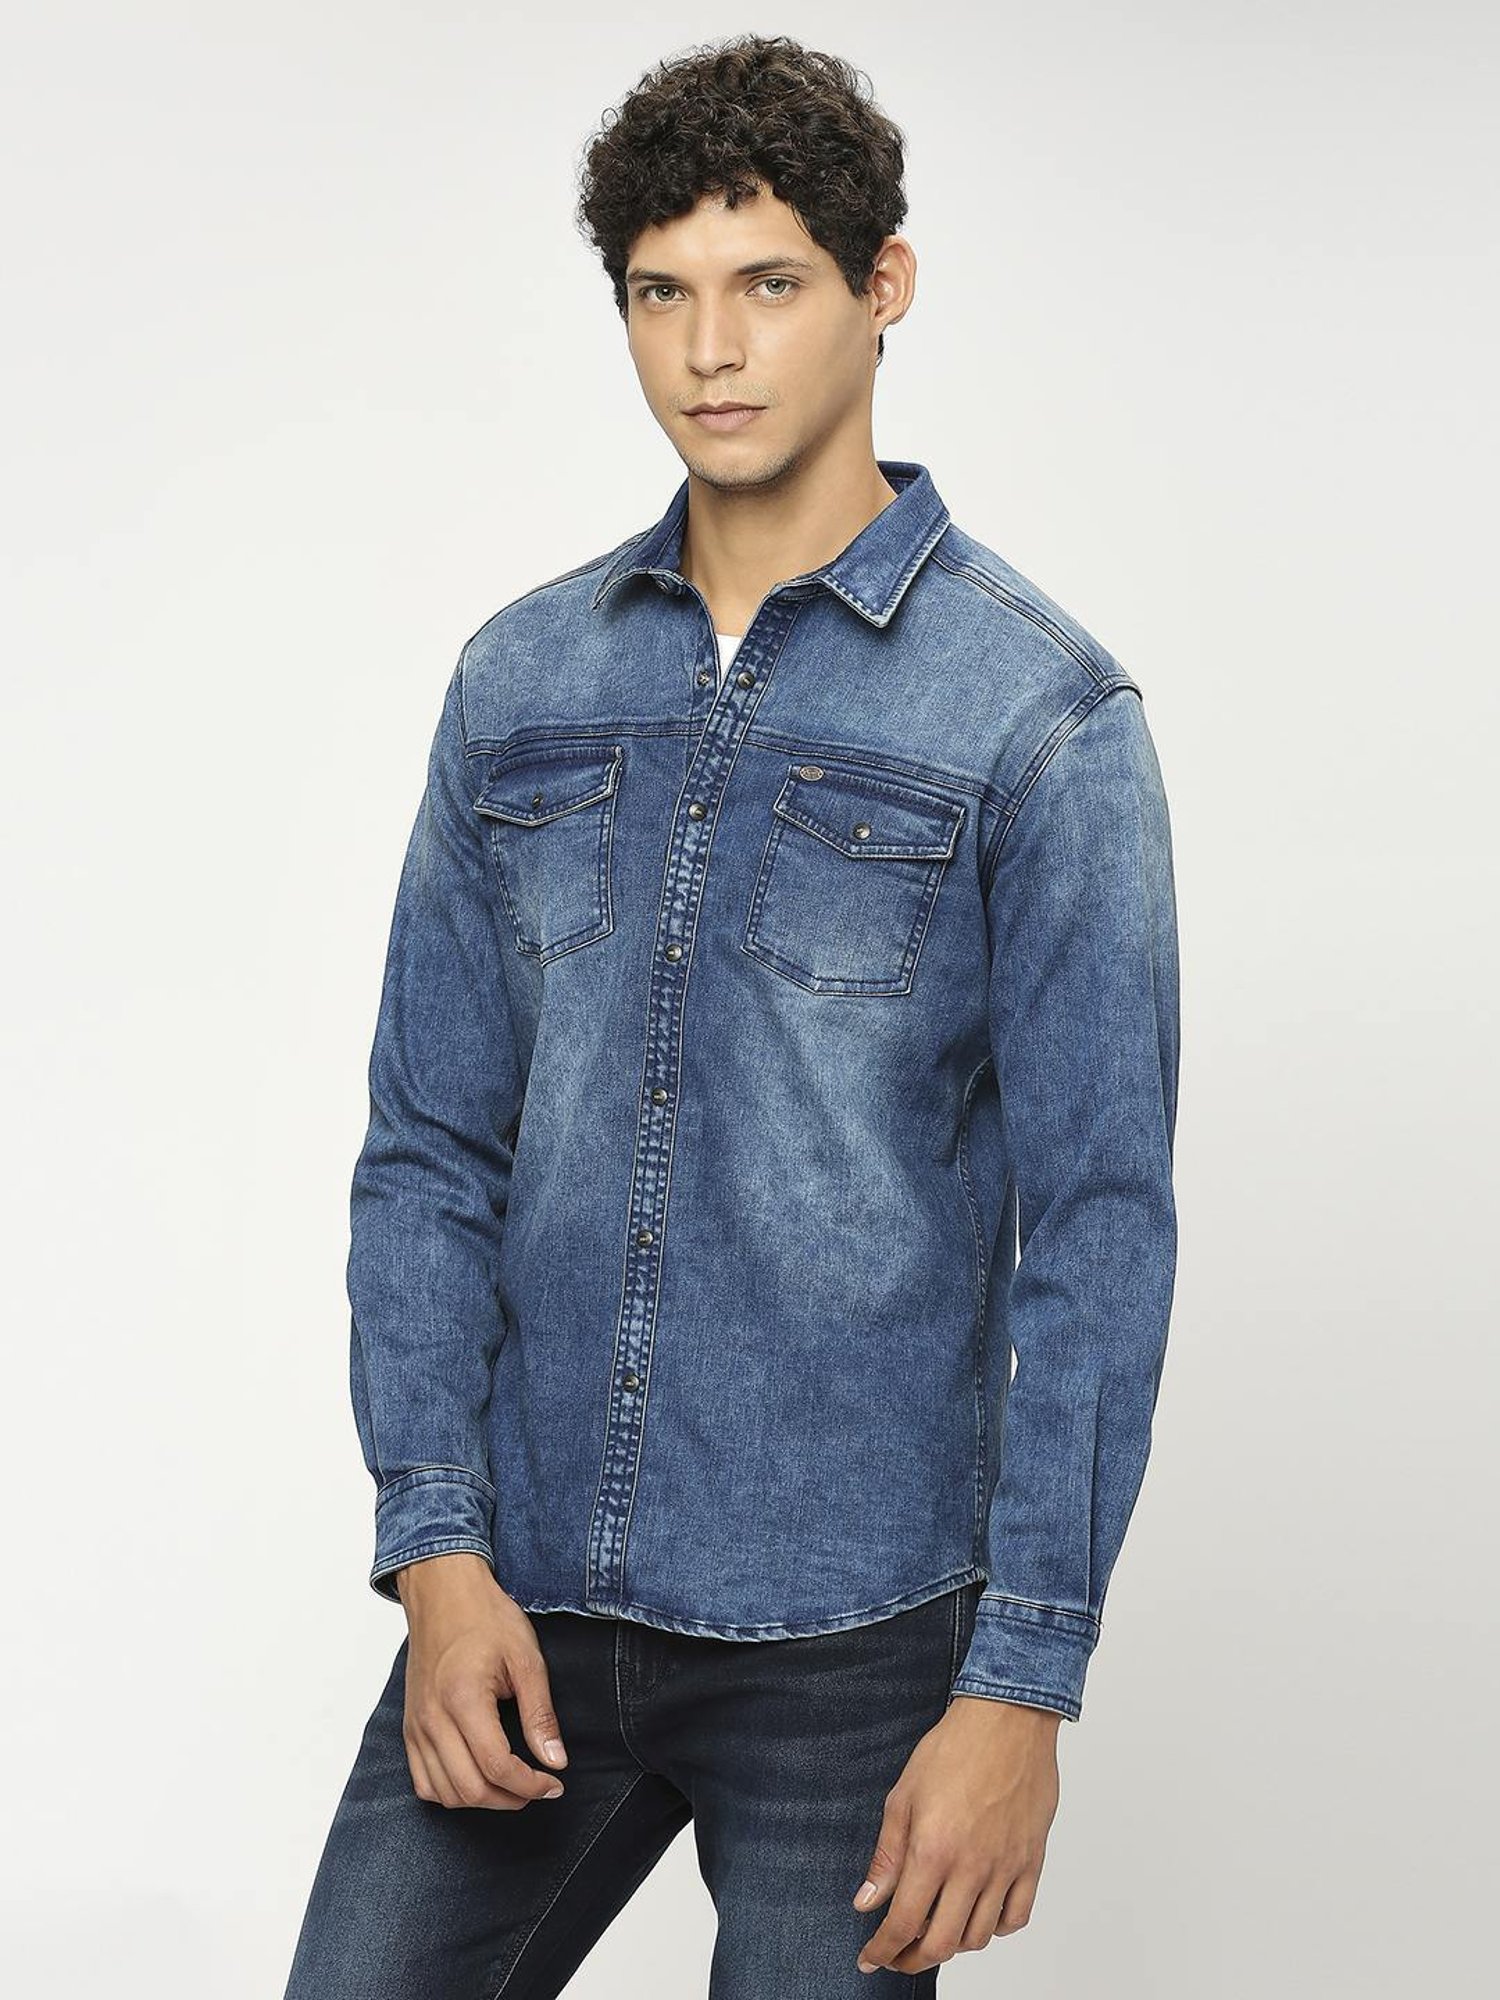 Top more than 167 denim shirt with dark jeans super hot